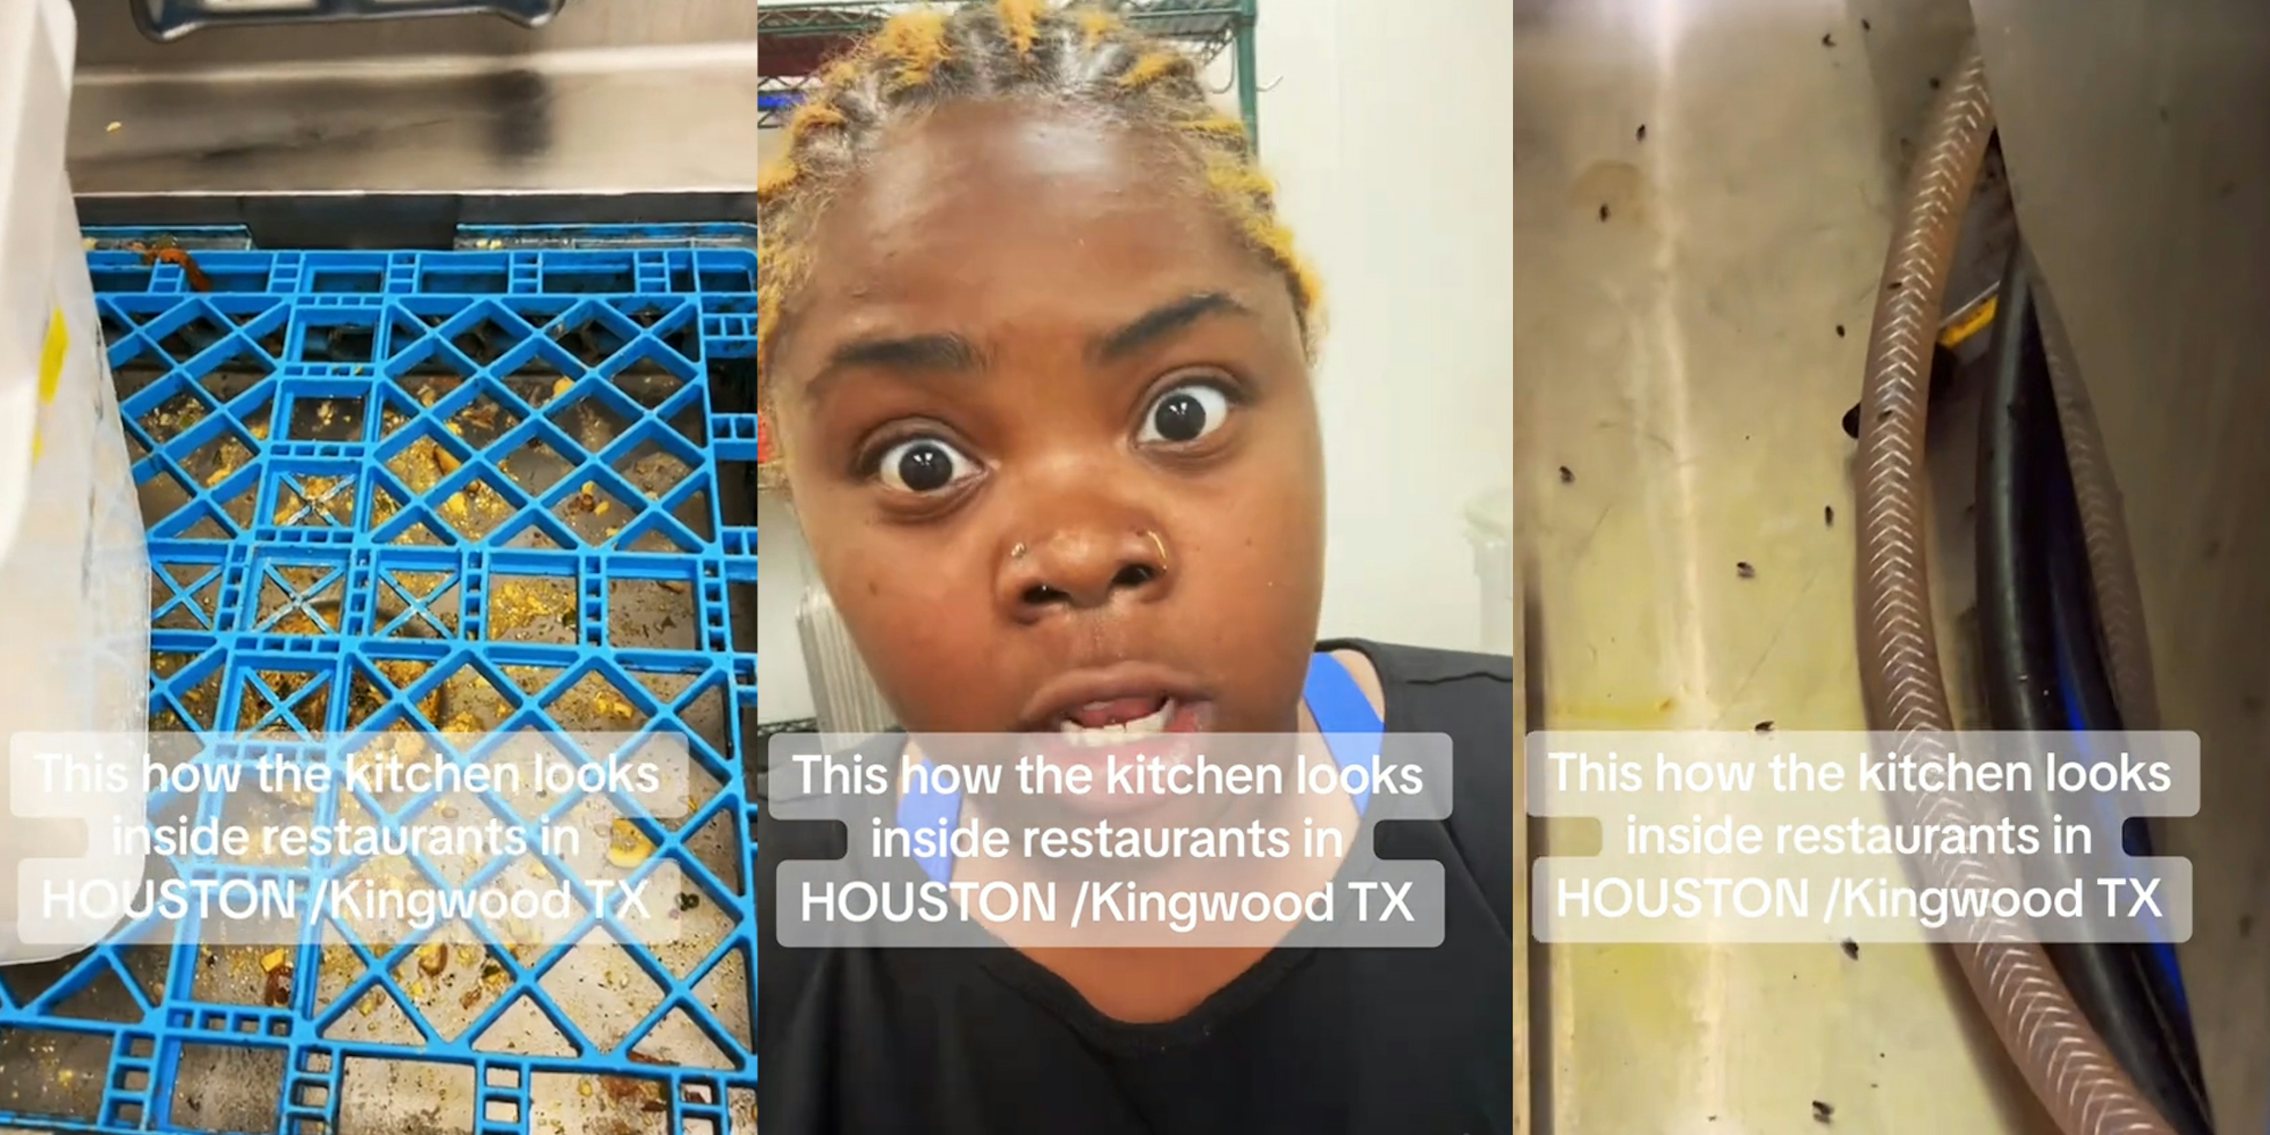 kitchen sink with caption 'This how the kitchen looks inside restaurants in HOUSTON/Kingwood TX' (l) restaurant worker with caption 'This how the kitchen looks inside restaurants in HOUSTON/Kingwood TX' (c) flies in kitchen with caption 'This how the kitchen looks inside restaurants in HOUSTON/Kingwood TX' (r)